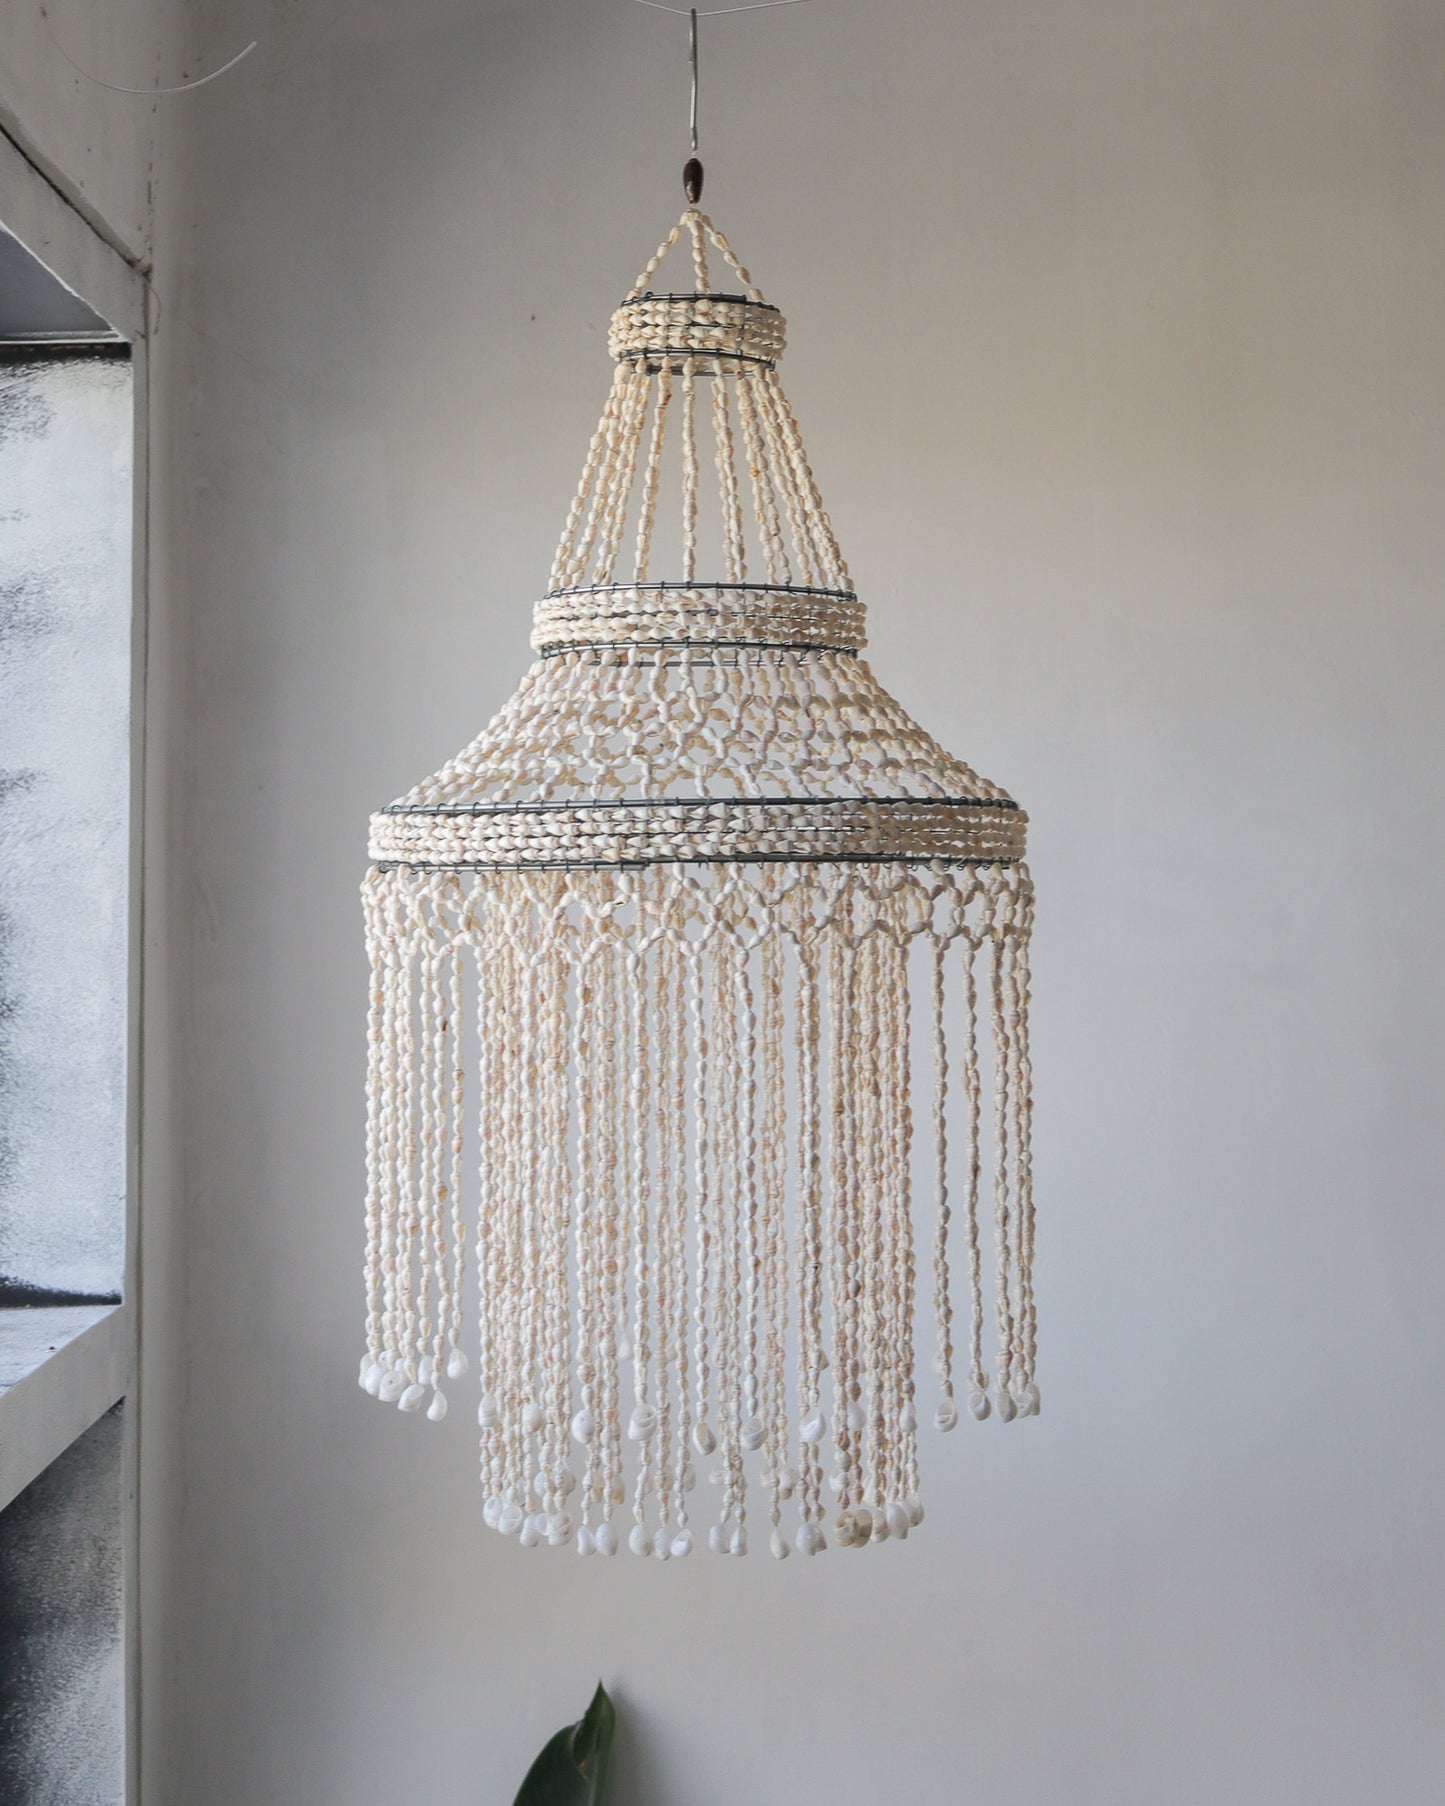 Chandelier made of seashell